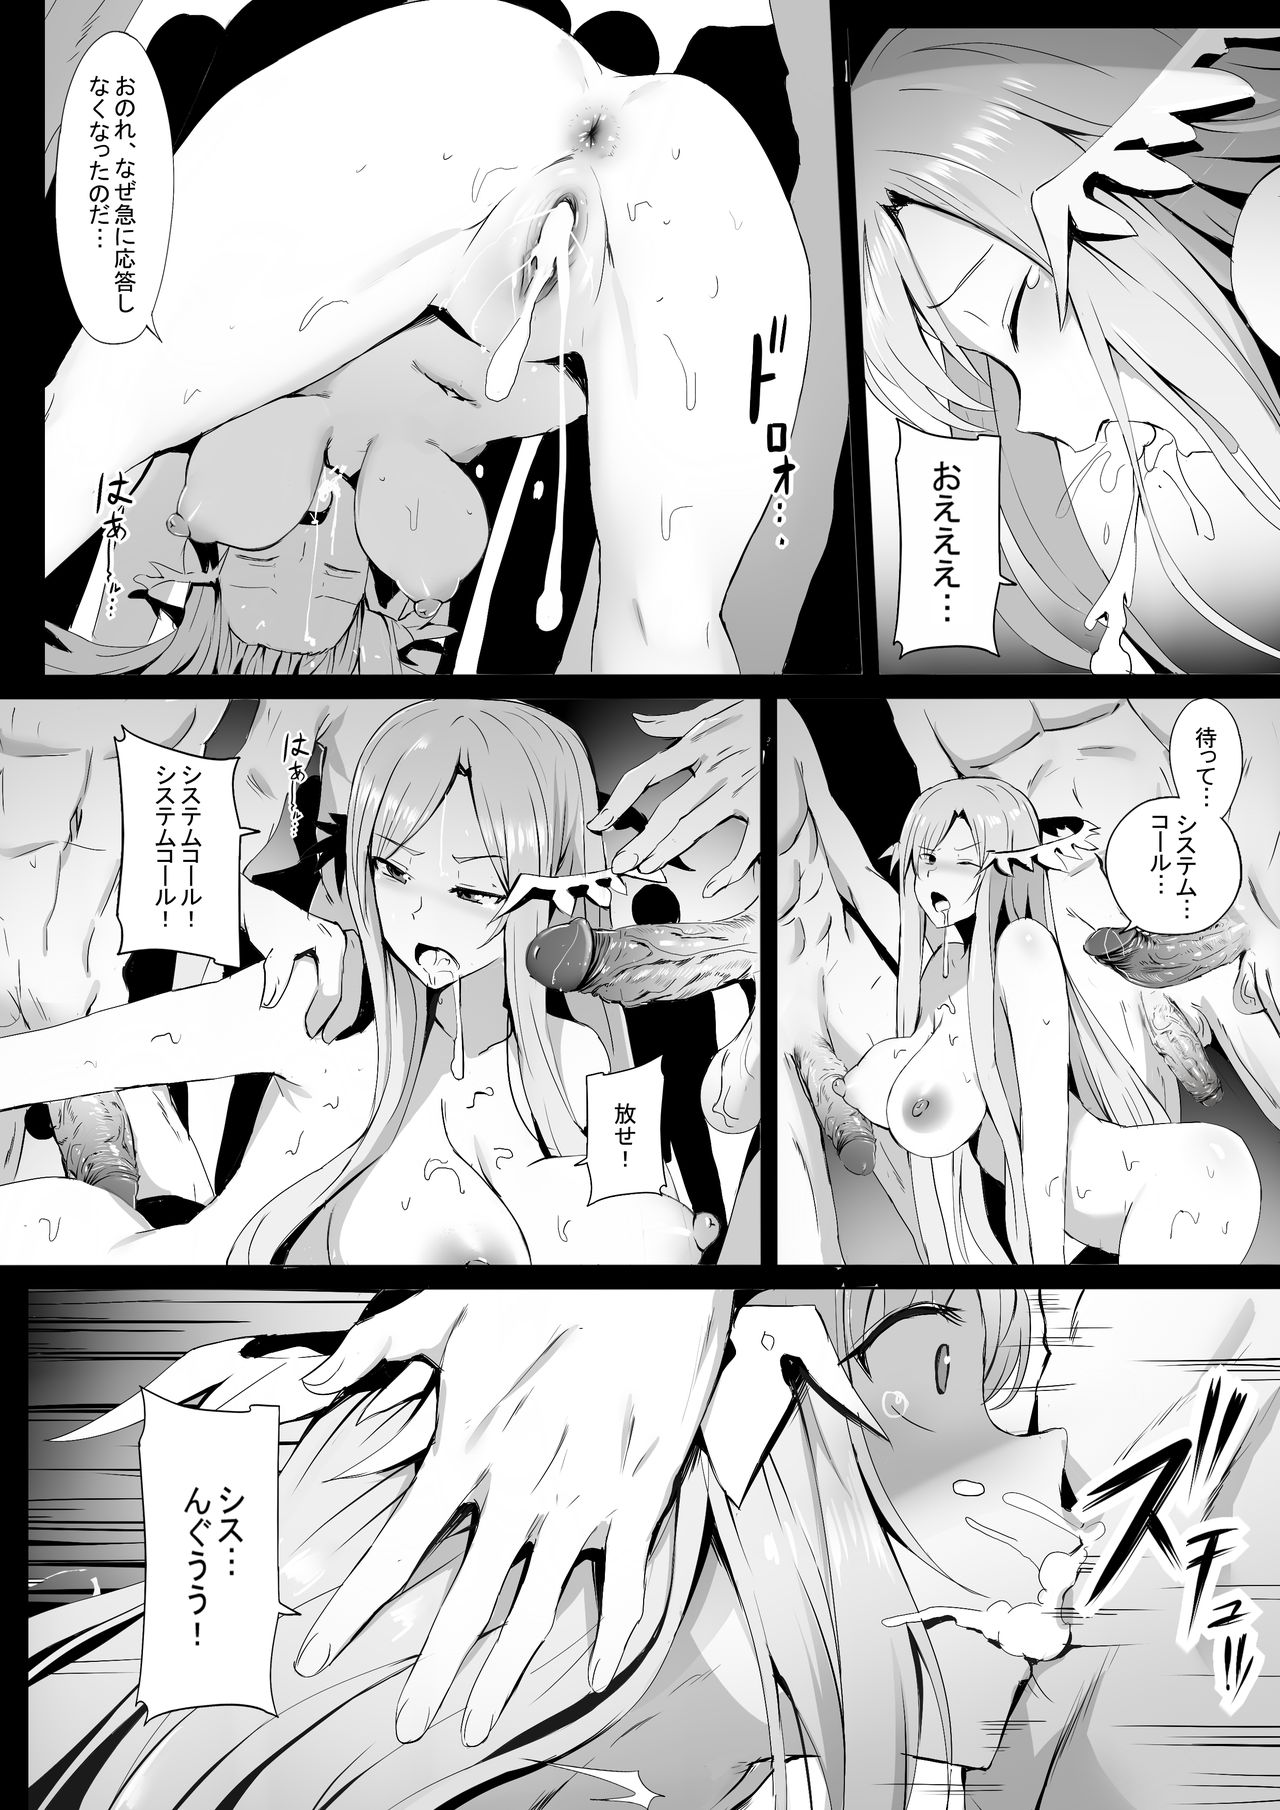 [Ginhaha] Error Of Call: System Call (Sword Art Online) page 7 full